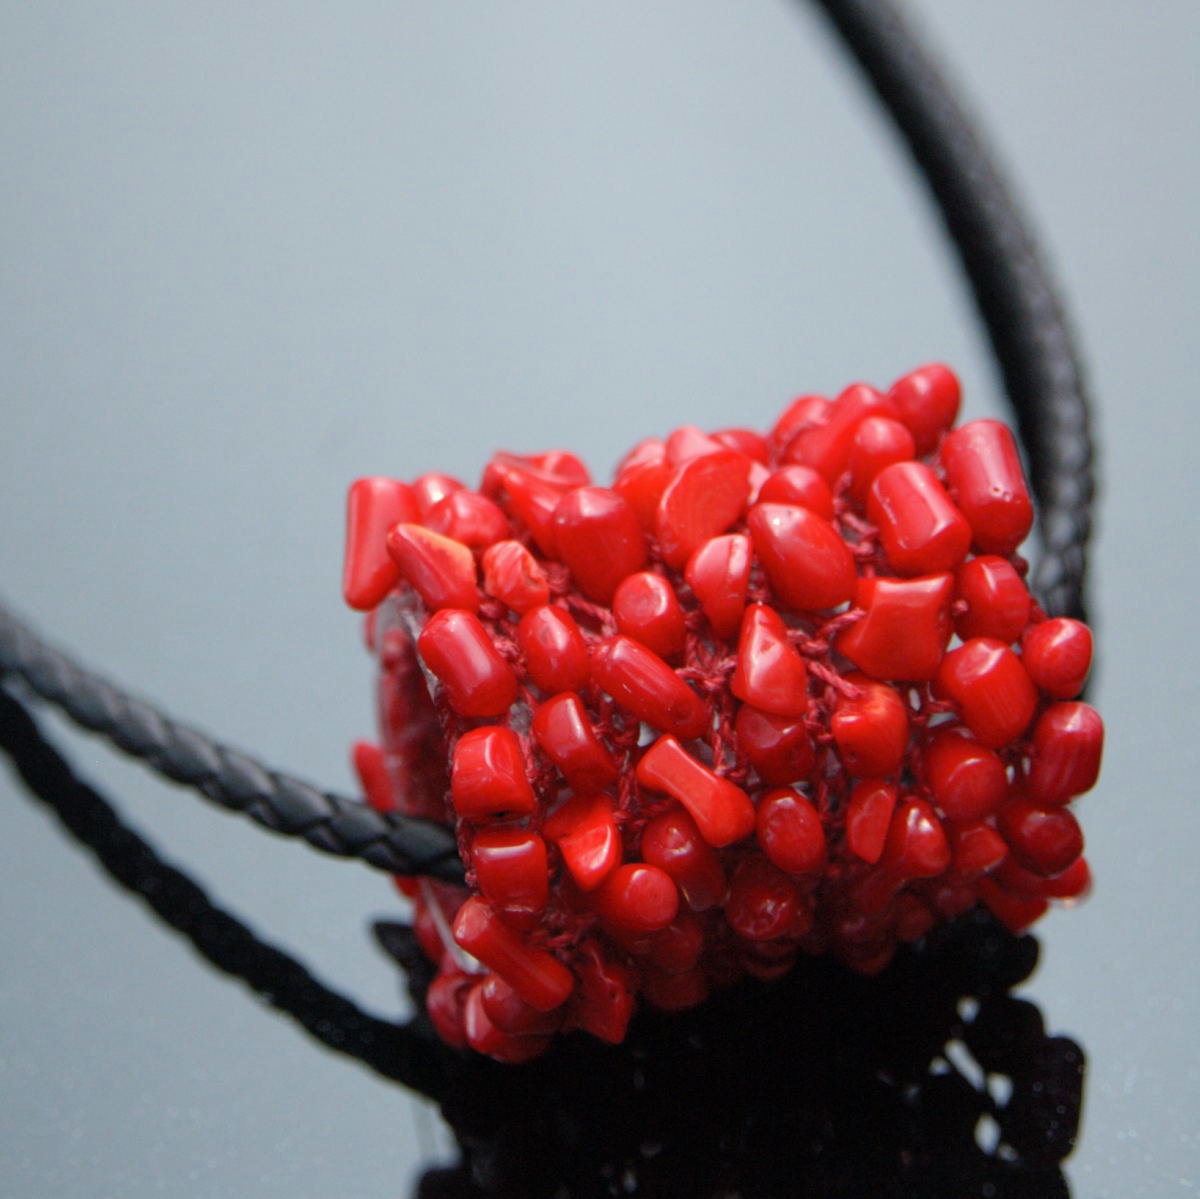 Red Coral Pendant - Cylinder Shaped Pendant Hand-knitted from Red Nylon Yarn with Natural Red Coral Chips